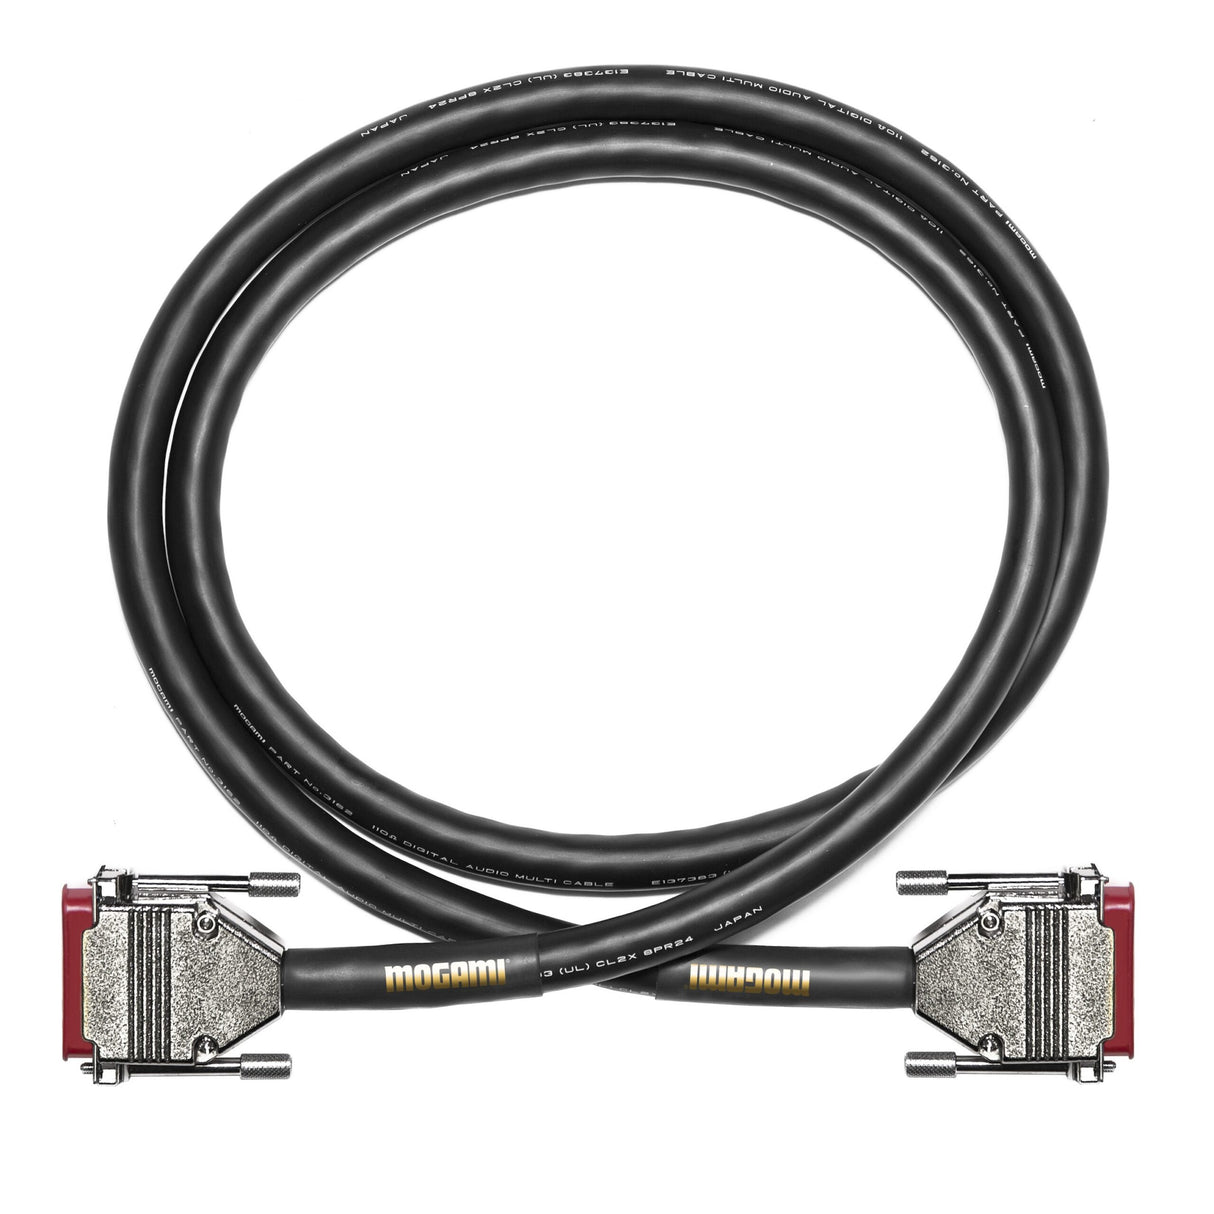 Mogami GOLD AES YTD DB25-DB25-20 DB25 to DB25 AES Yamaha to Tascam Format Crossover Cable, 20-Feet